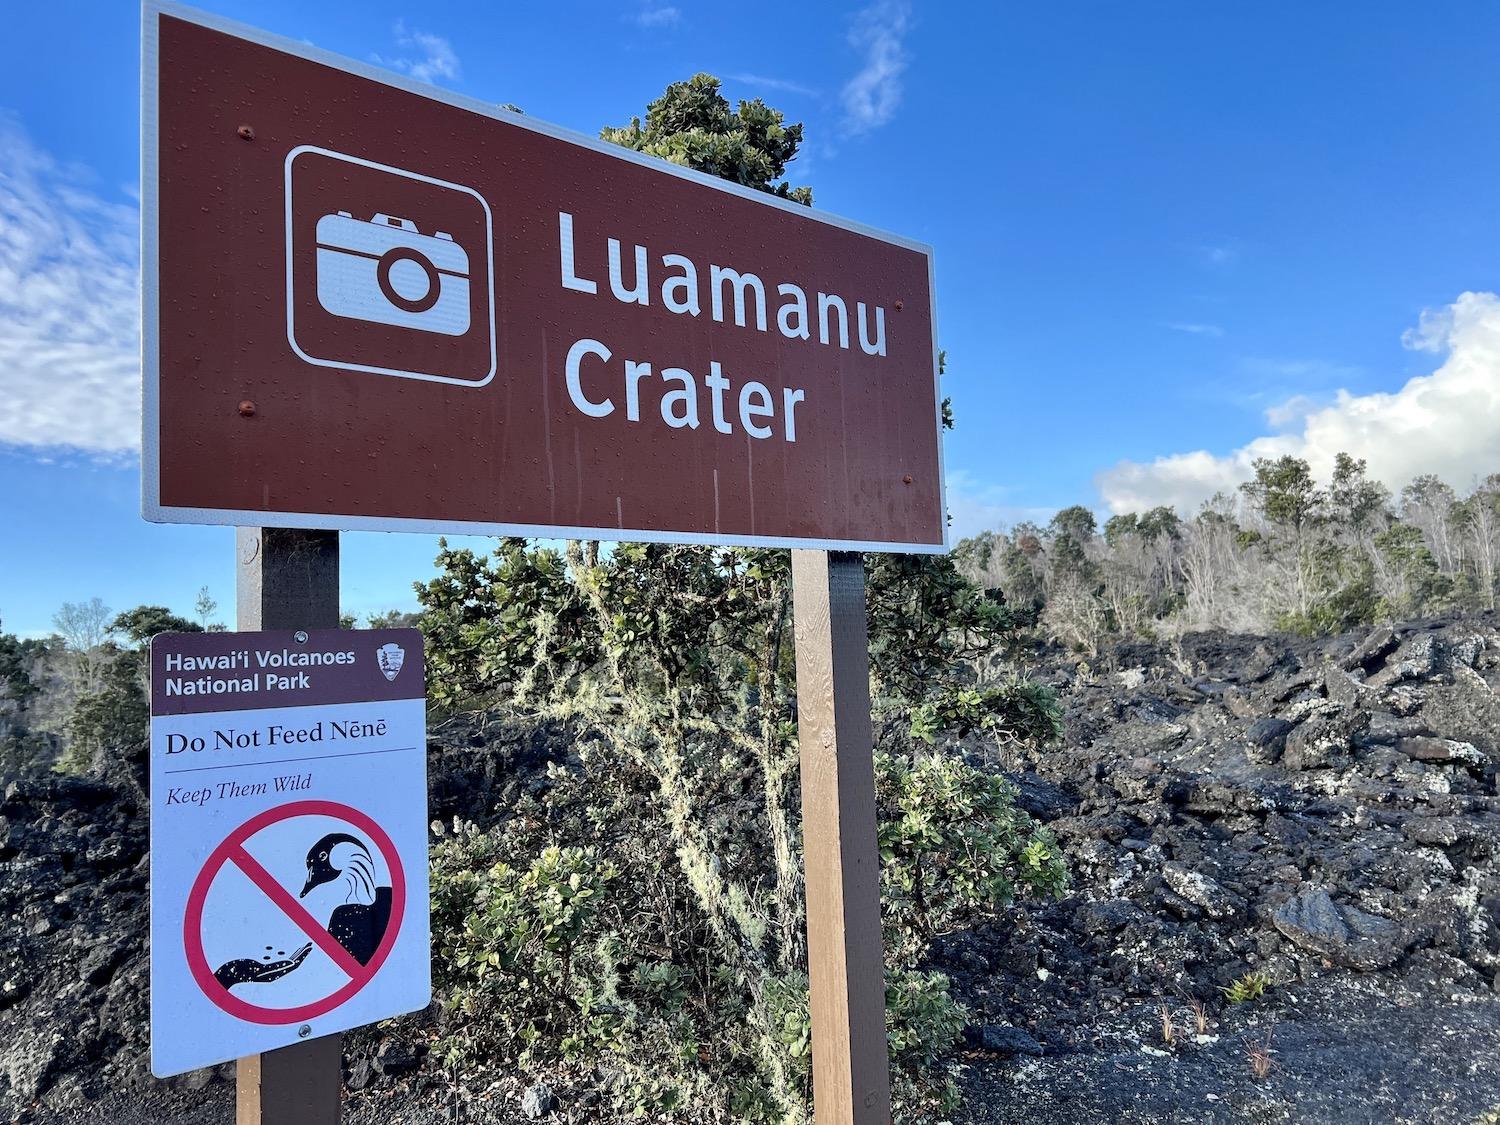 More park signage to protect nēnē, whose webbed feet have evolved to walk across lava rock landscapes.